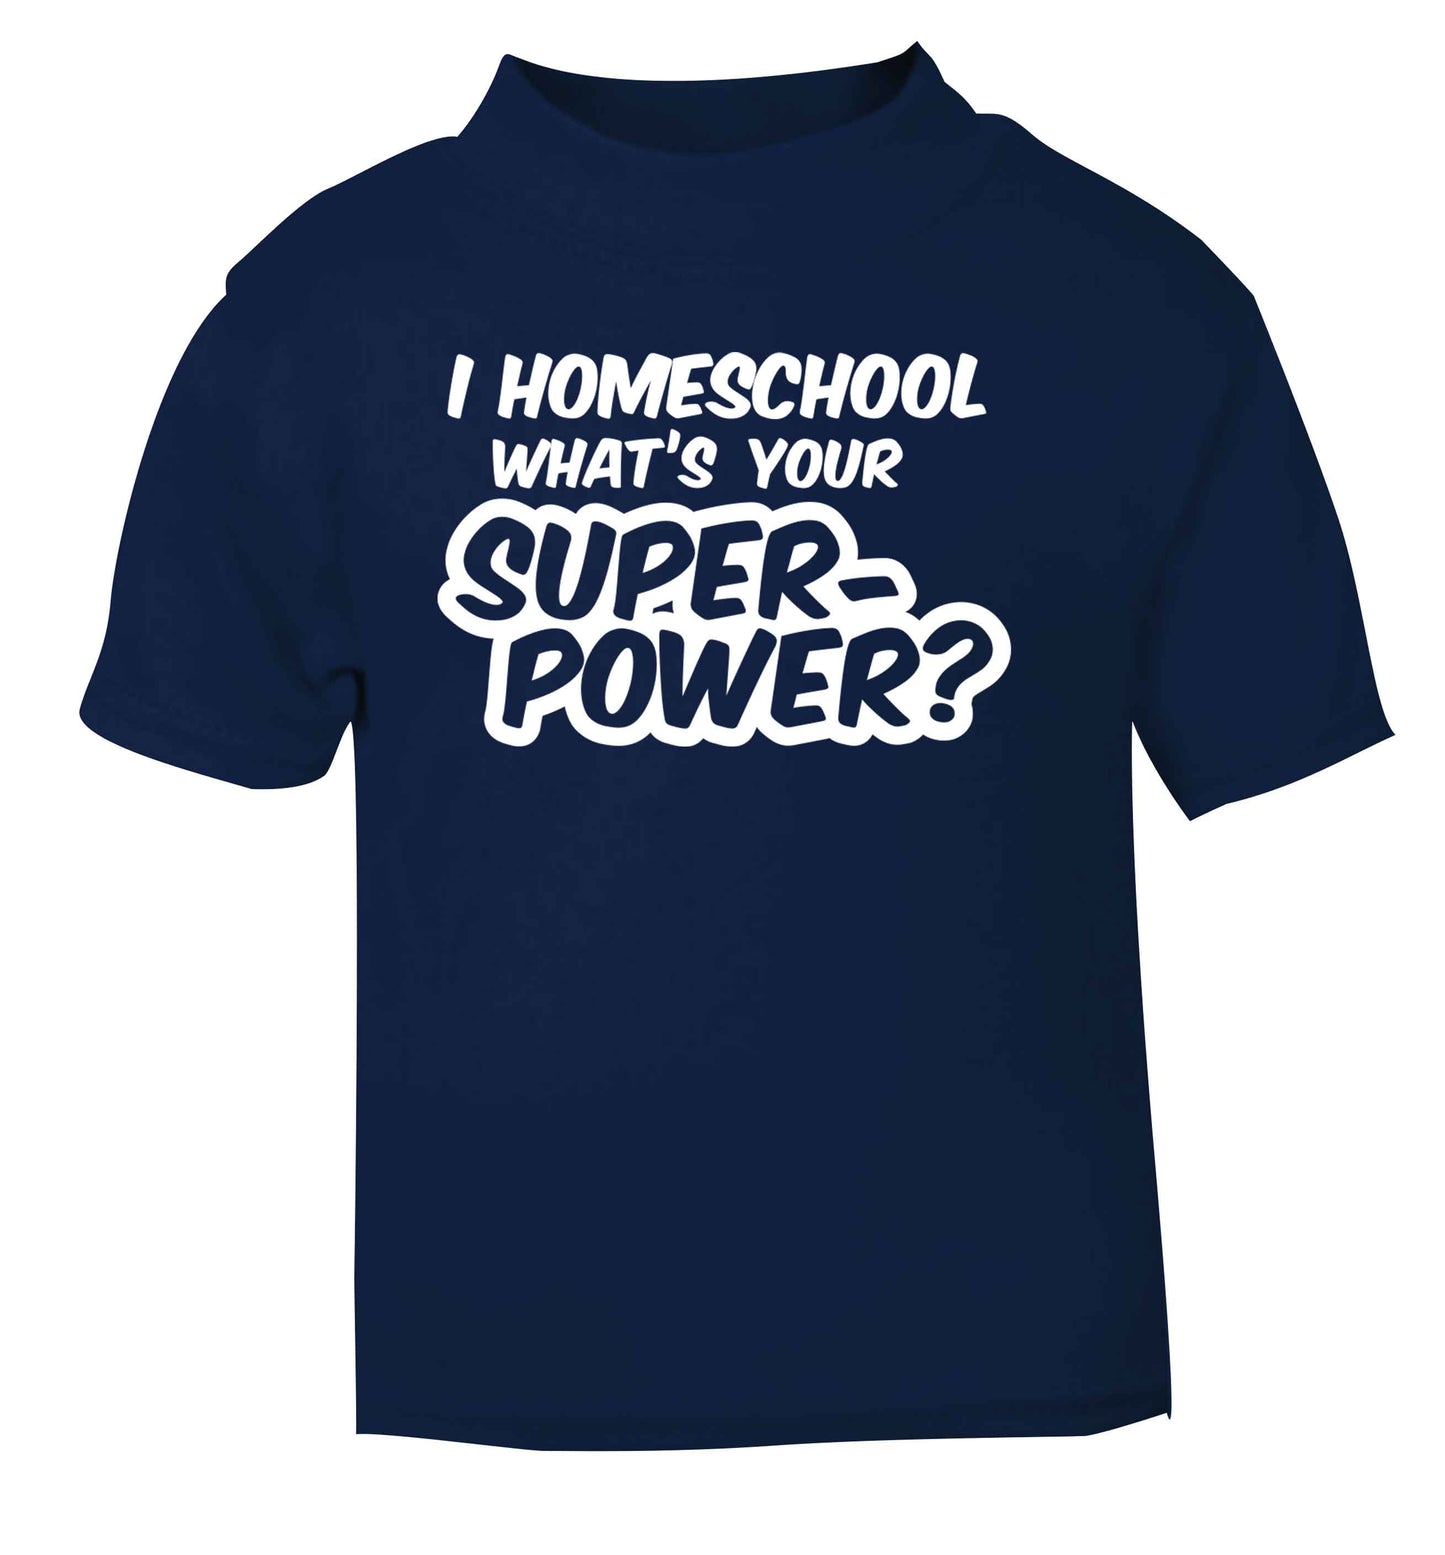 I homeschool what's your superpower? navy Baby Toddler Tshirt 2 Years